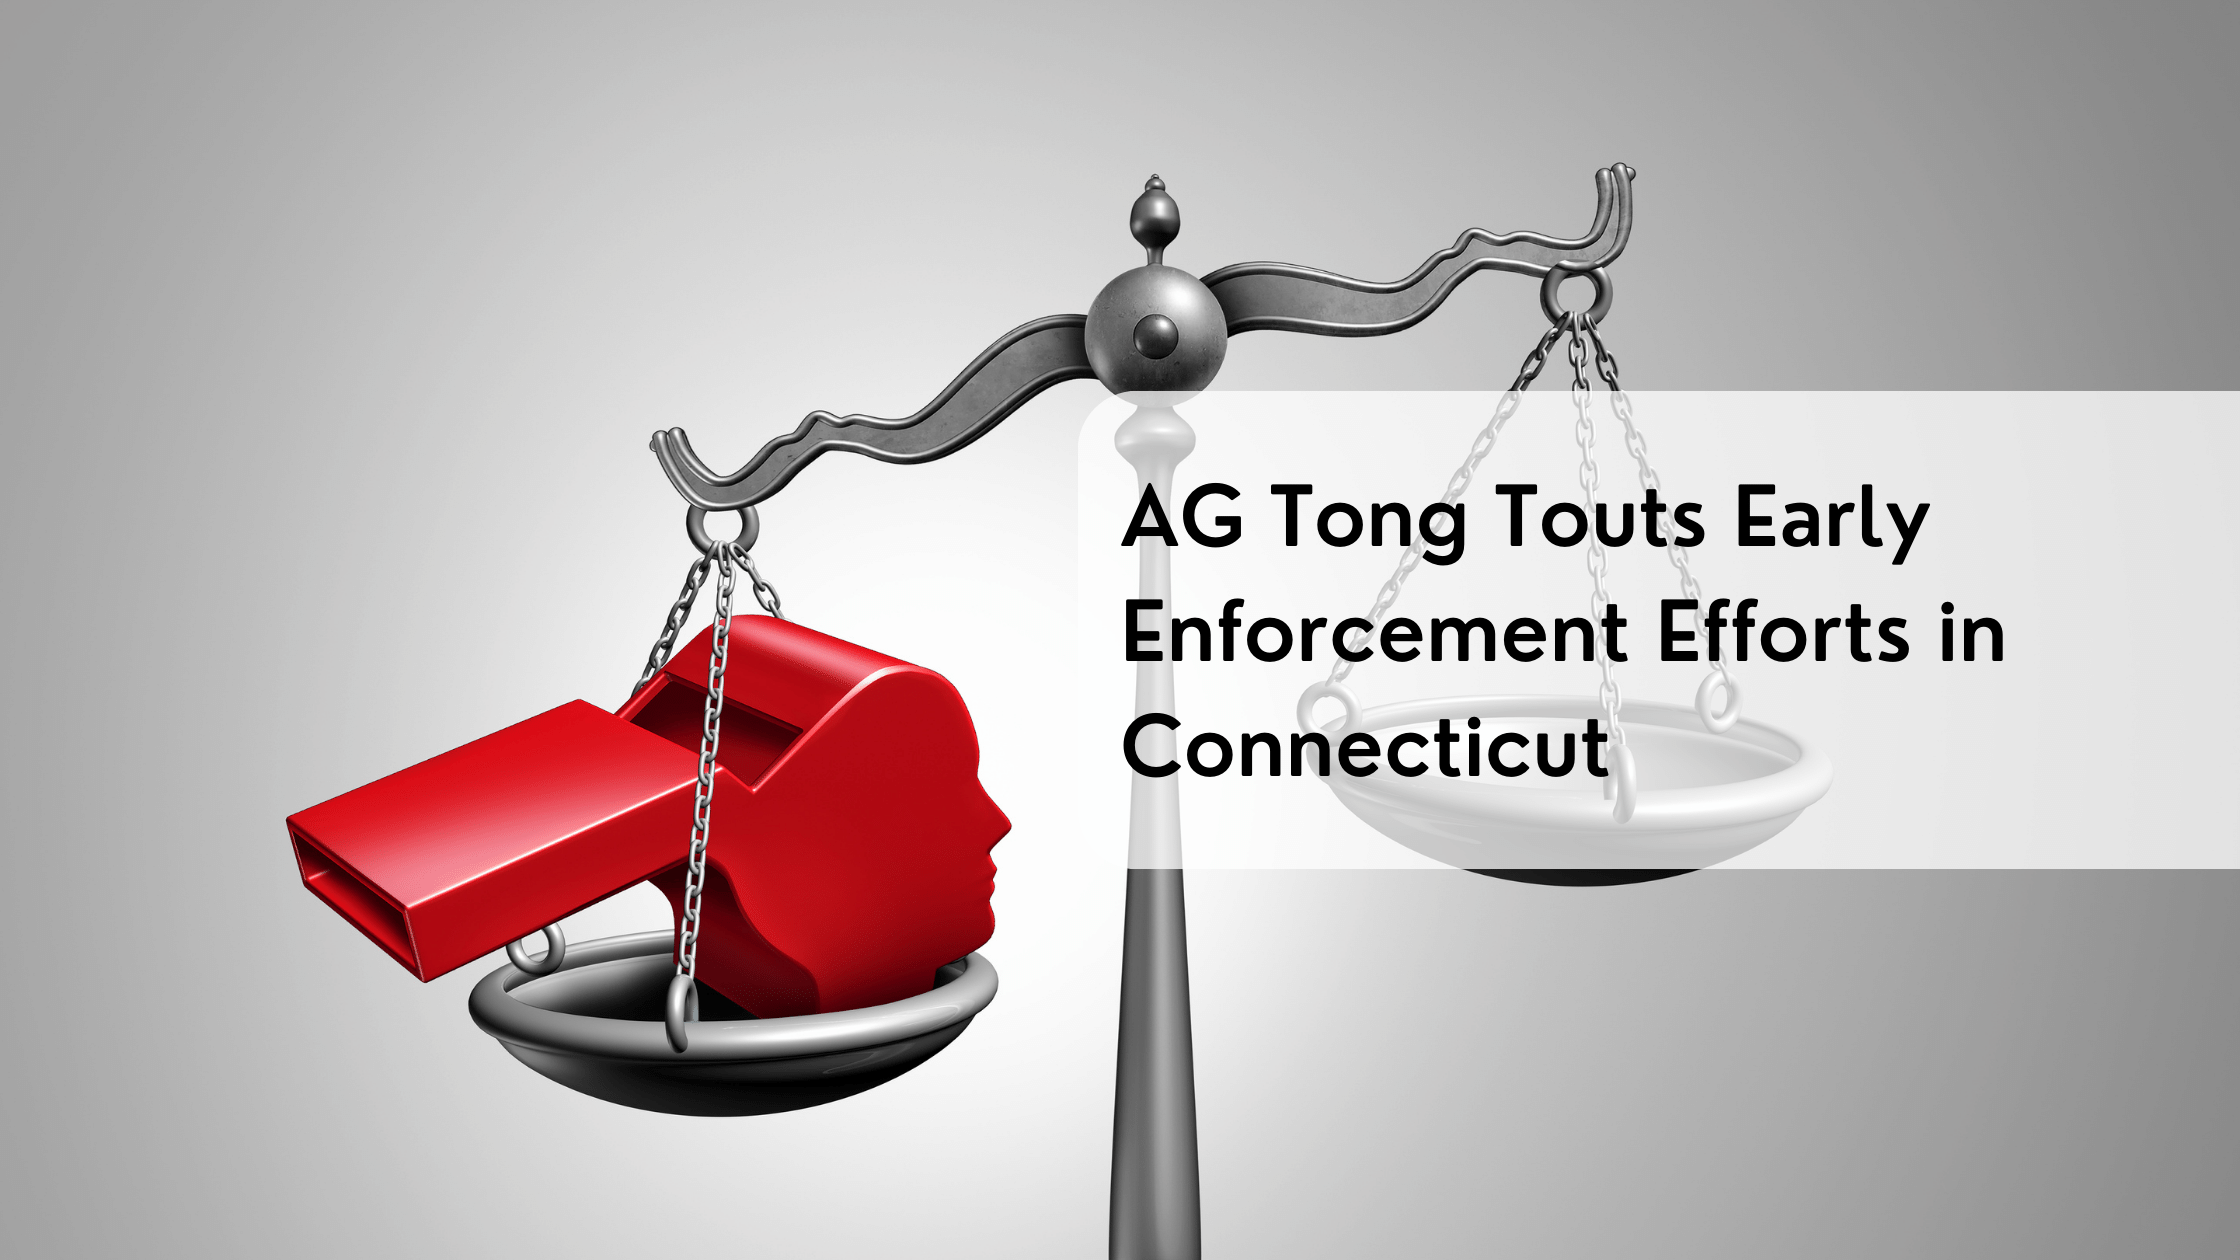 AG Tong Touts Early Enforcement Efforts in Connecticut